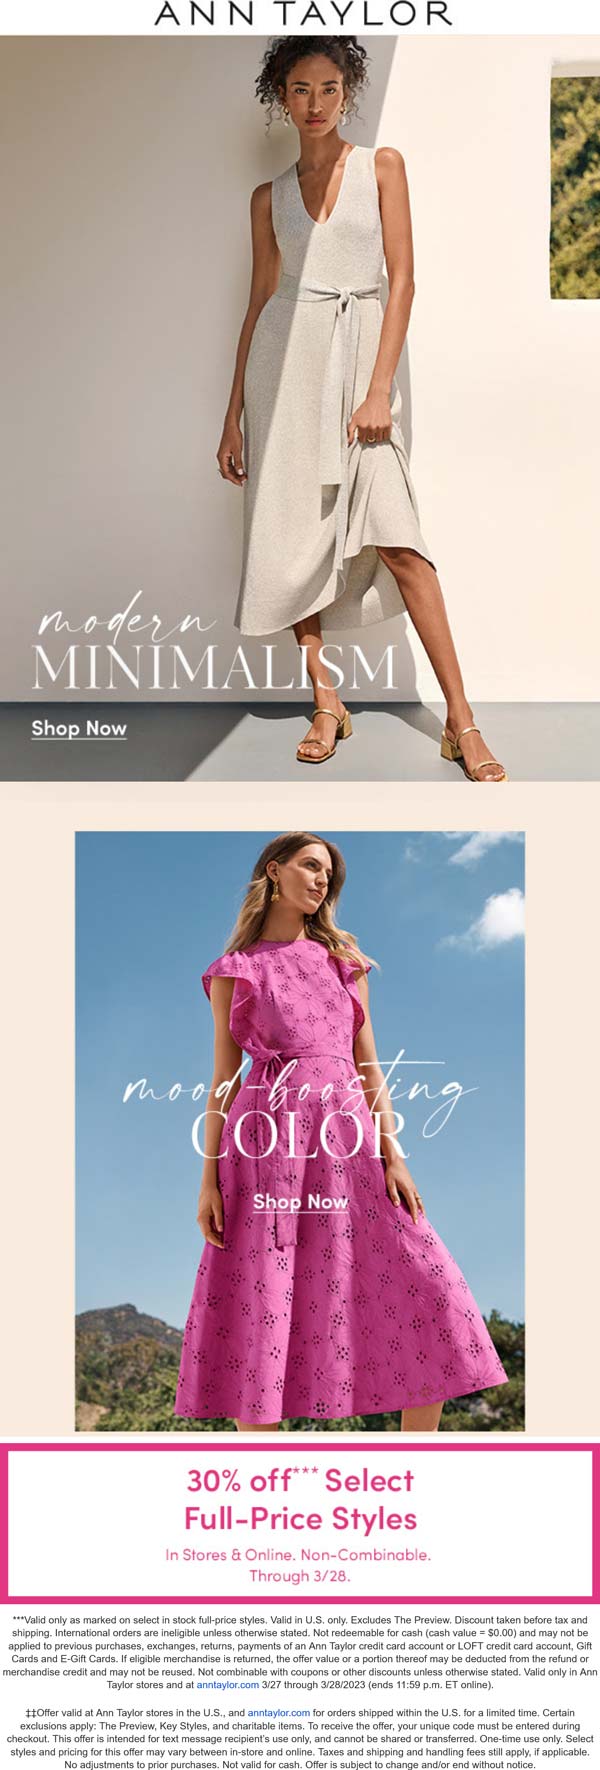 Ann Taylor stores Coupon  30% off today at Ann Taylor, ditto online #anntaylor 